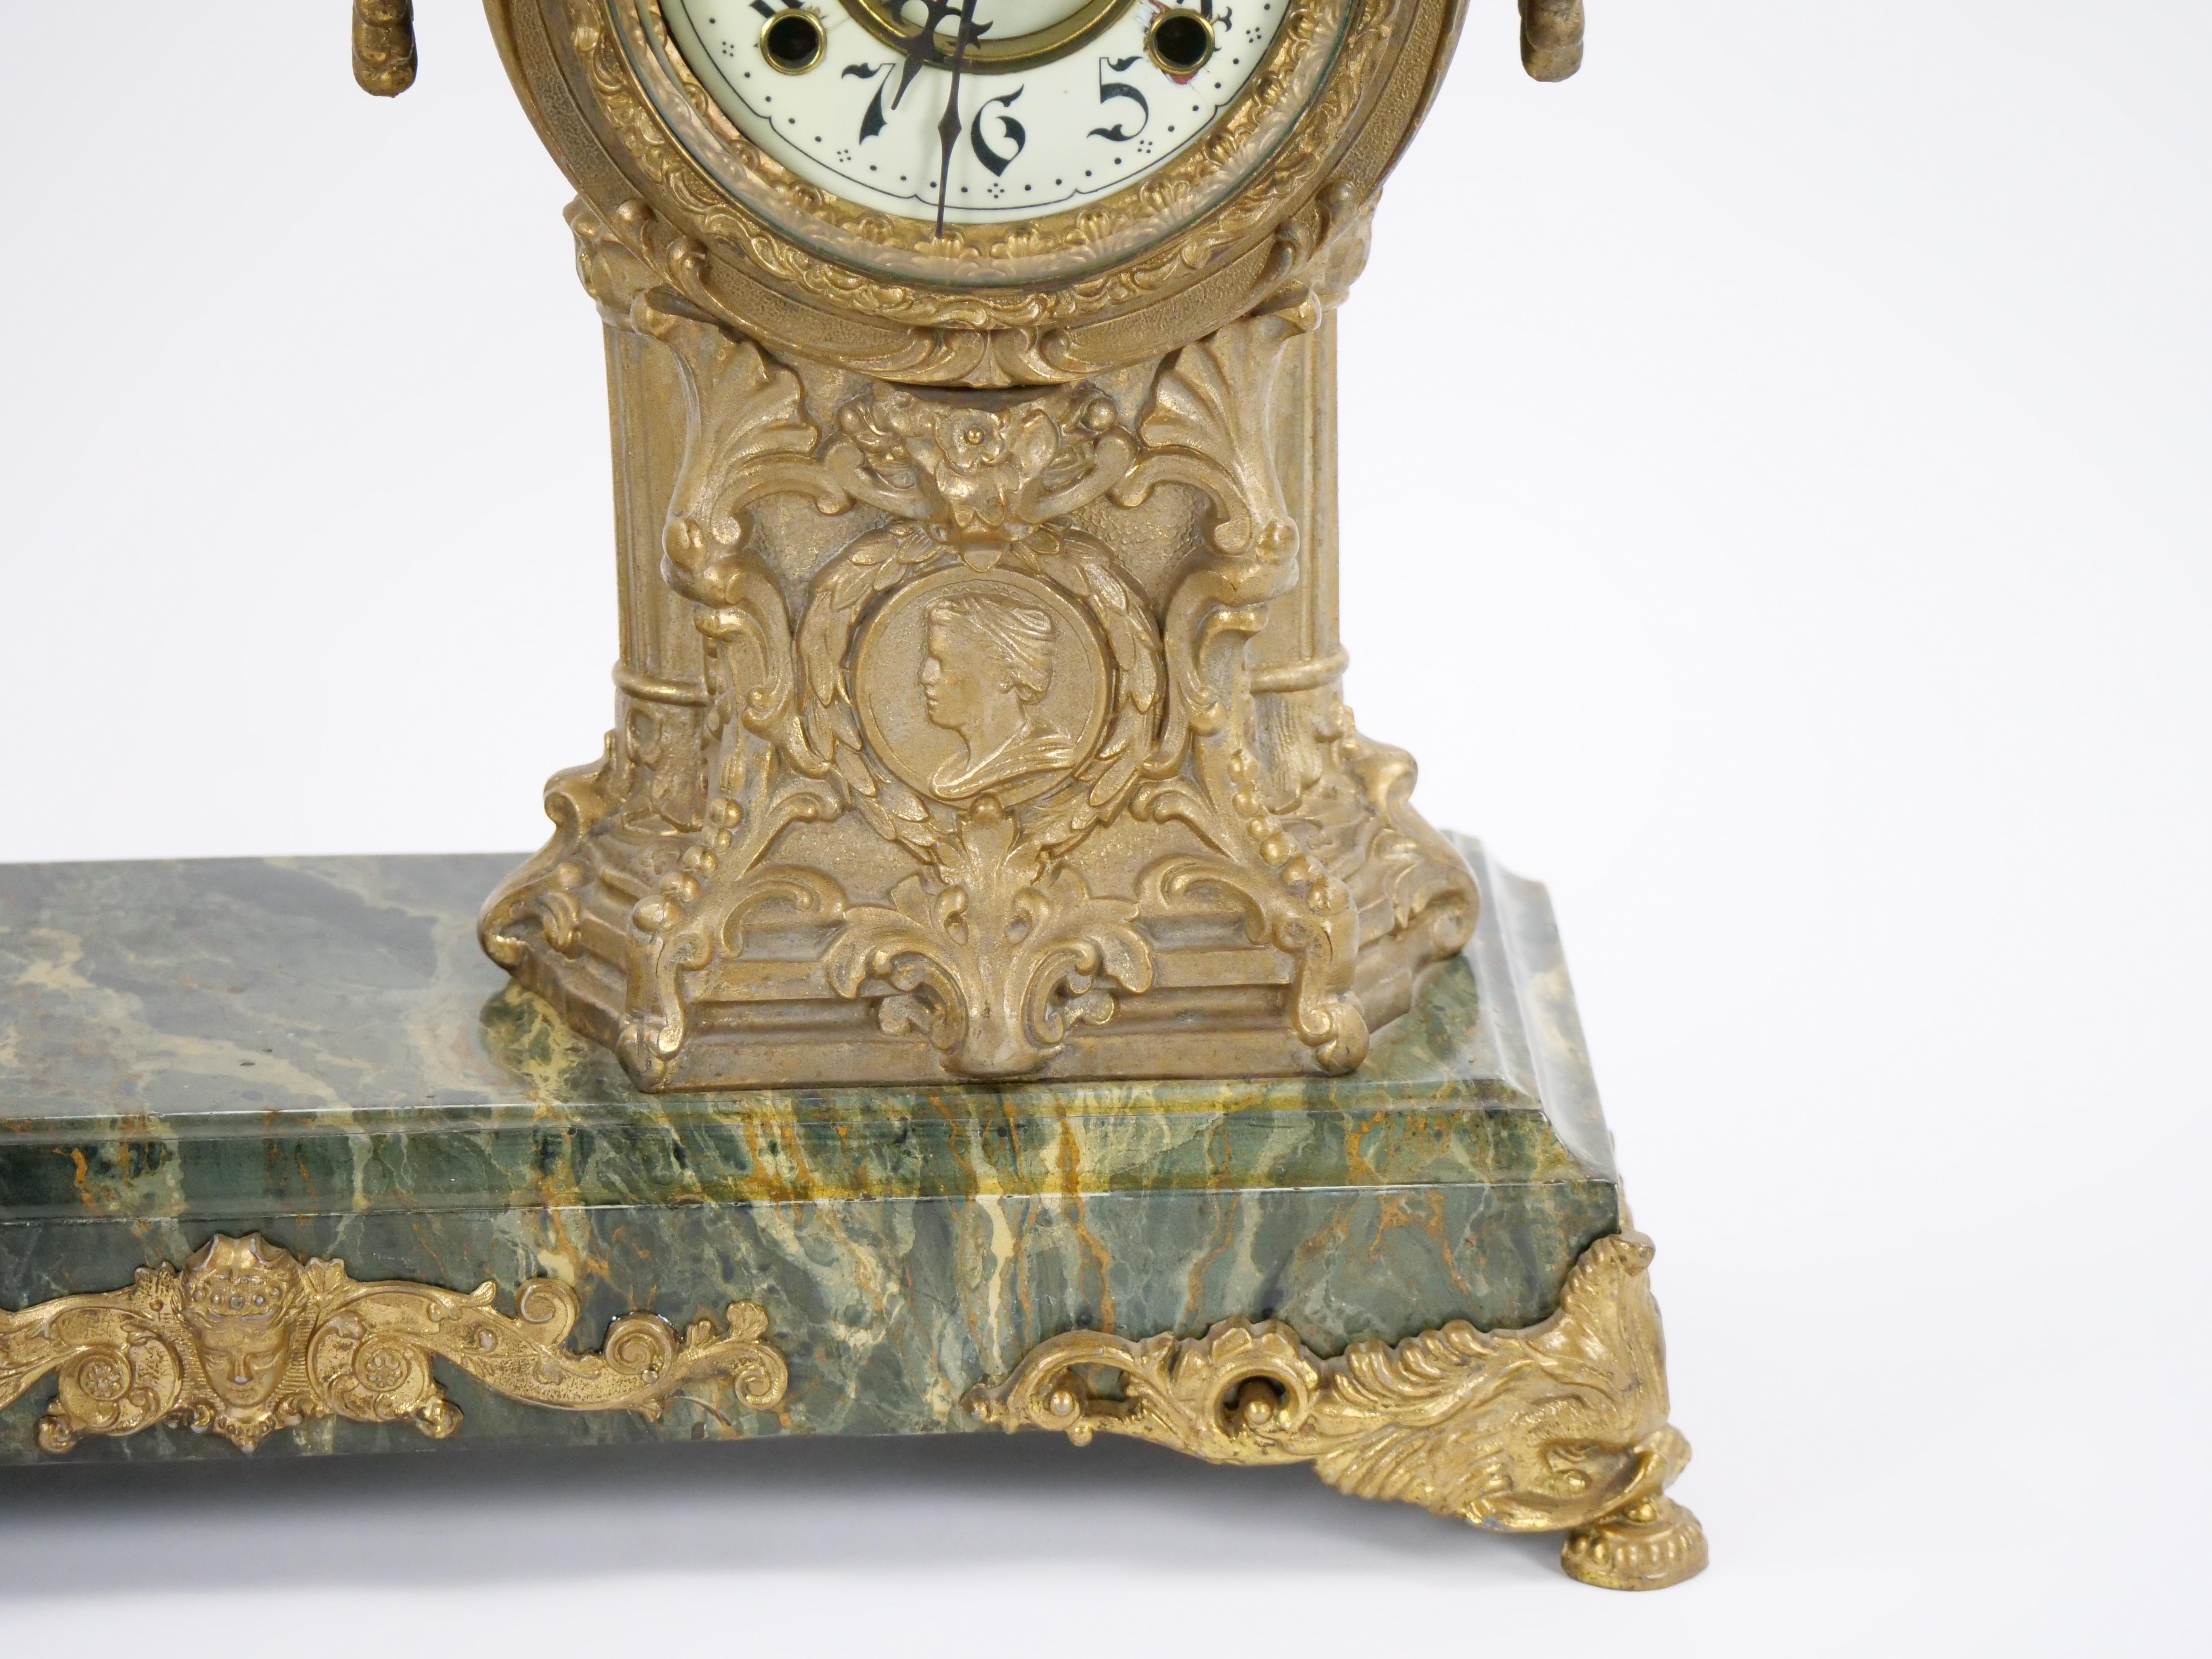  Gilt Bronze Footed Marble Base Mantel Clock Depicting Carthage Warrior In Good Condition For Sale In Tarry Town, NY